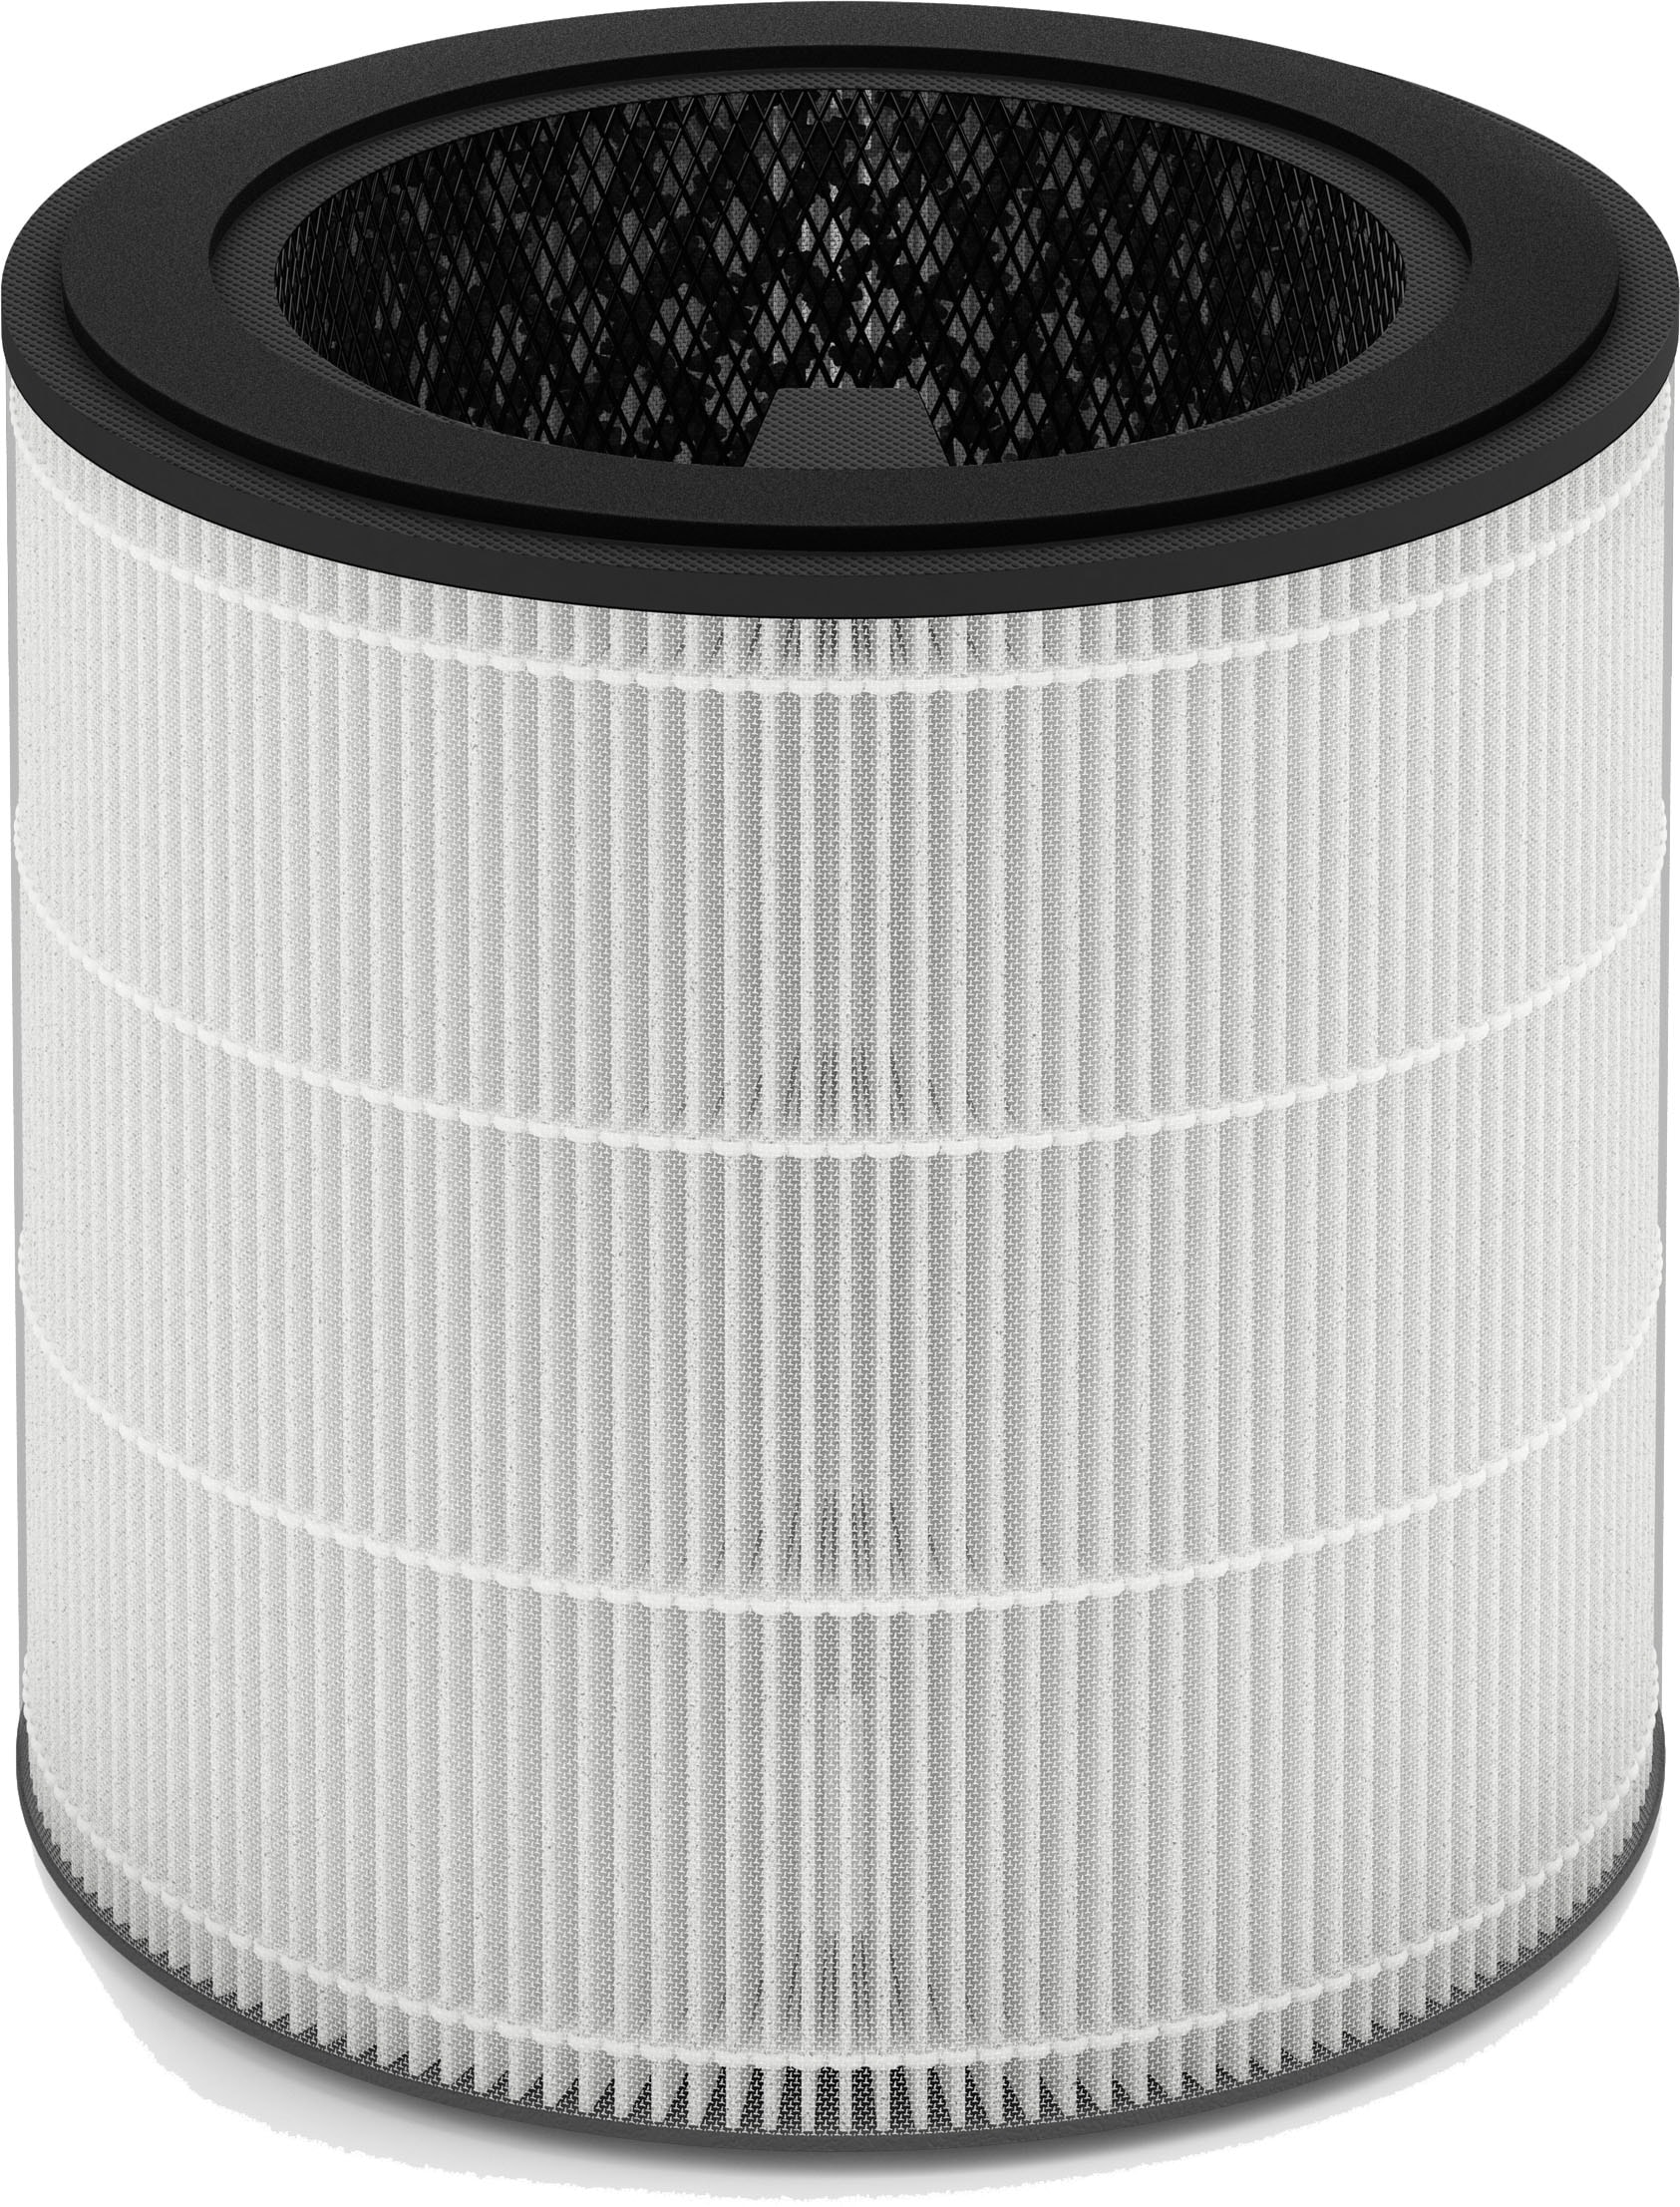 Philips NanoProtect Filter »FY0293/30«, (Packung, 1 tlg.), Kombifilter